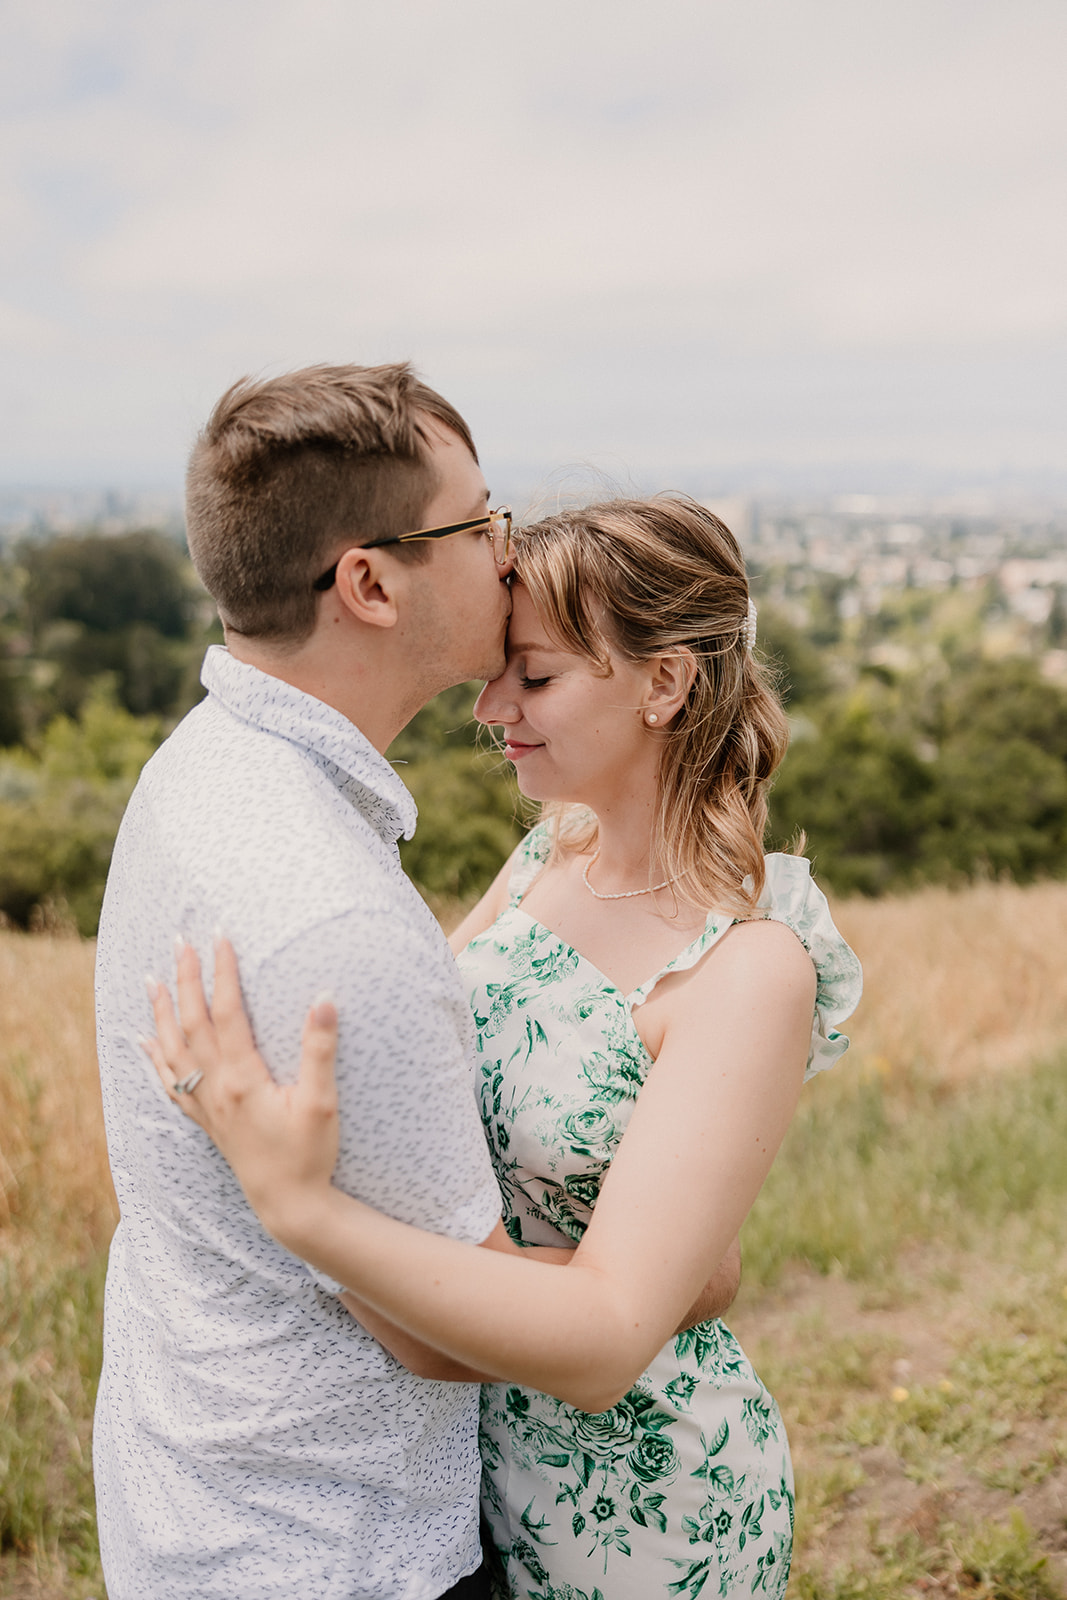 A young couple stands closely with foreheads touching, embracing each other in a grassy outdoor setting under a partly cloudy sky at their day after session